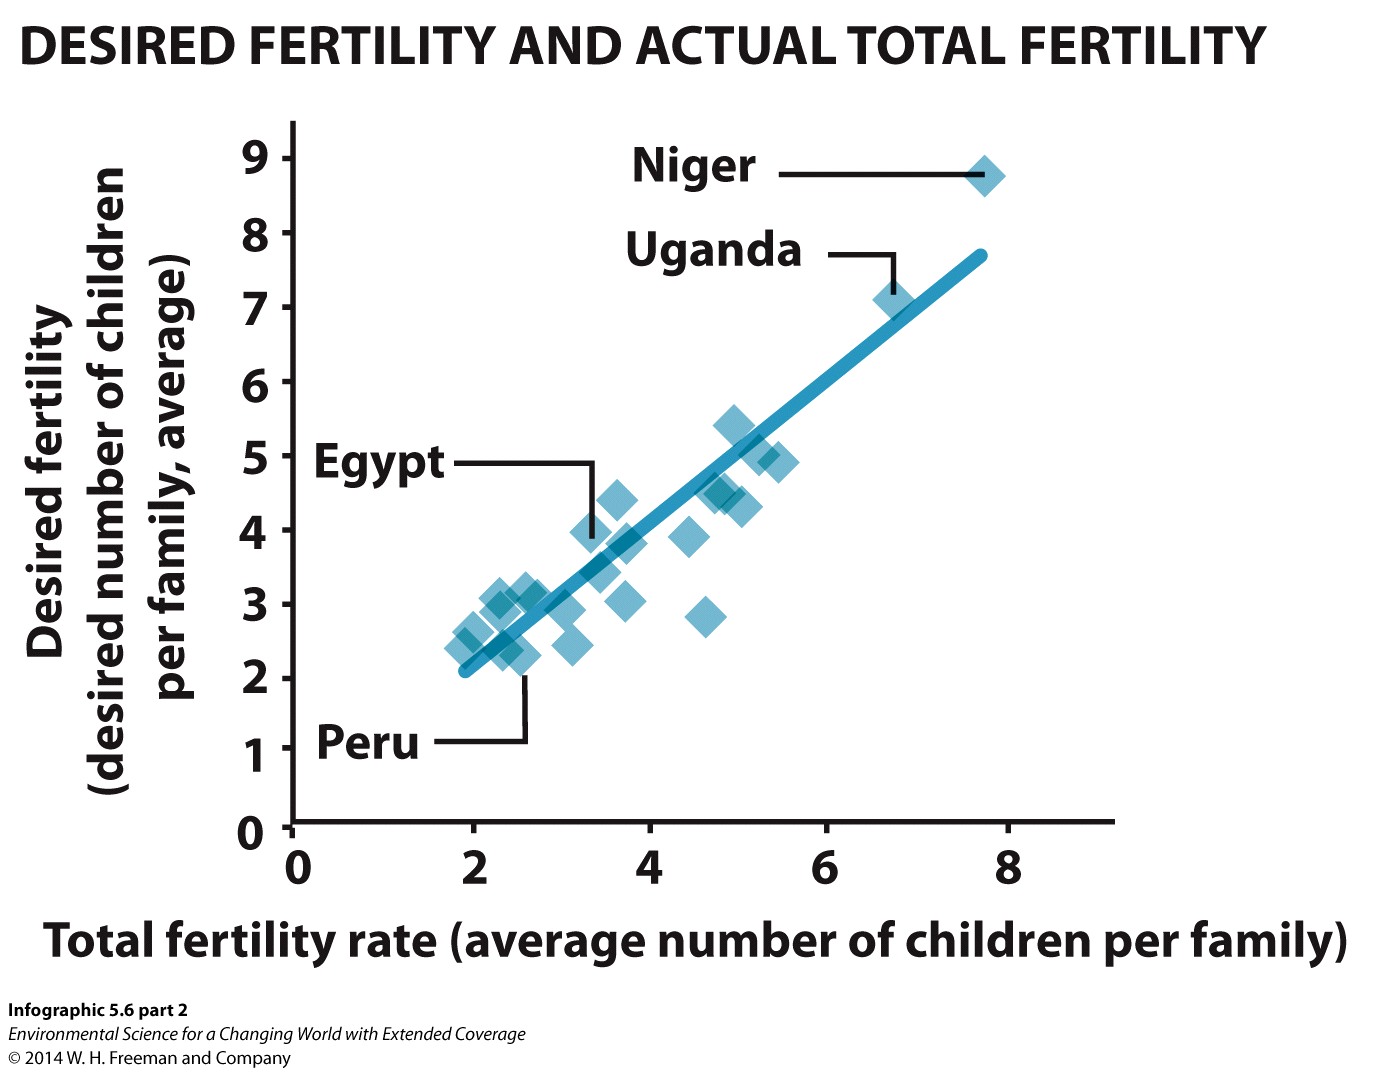 Infographic 5.4: Desired Fertility and Actual Total Fertility